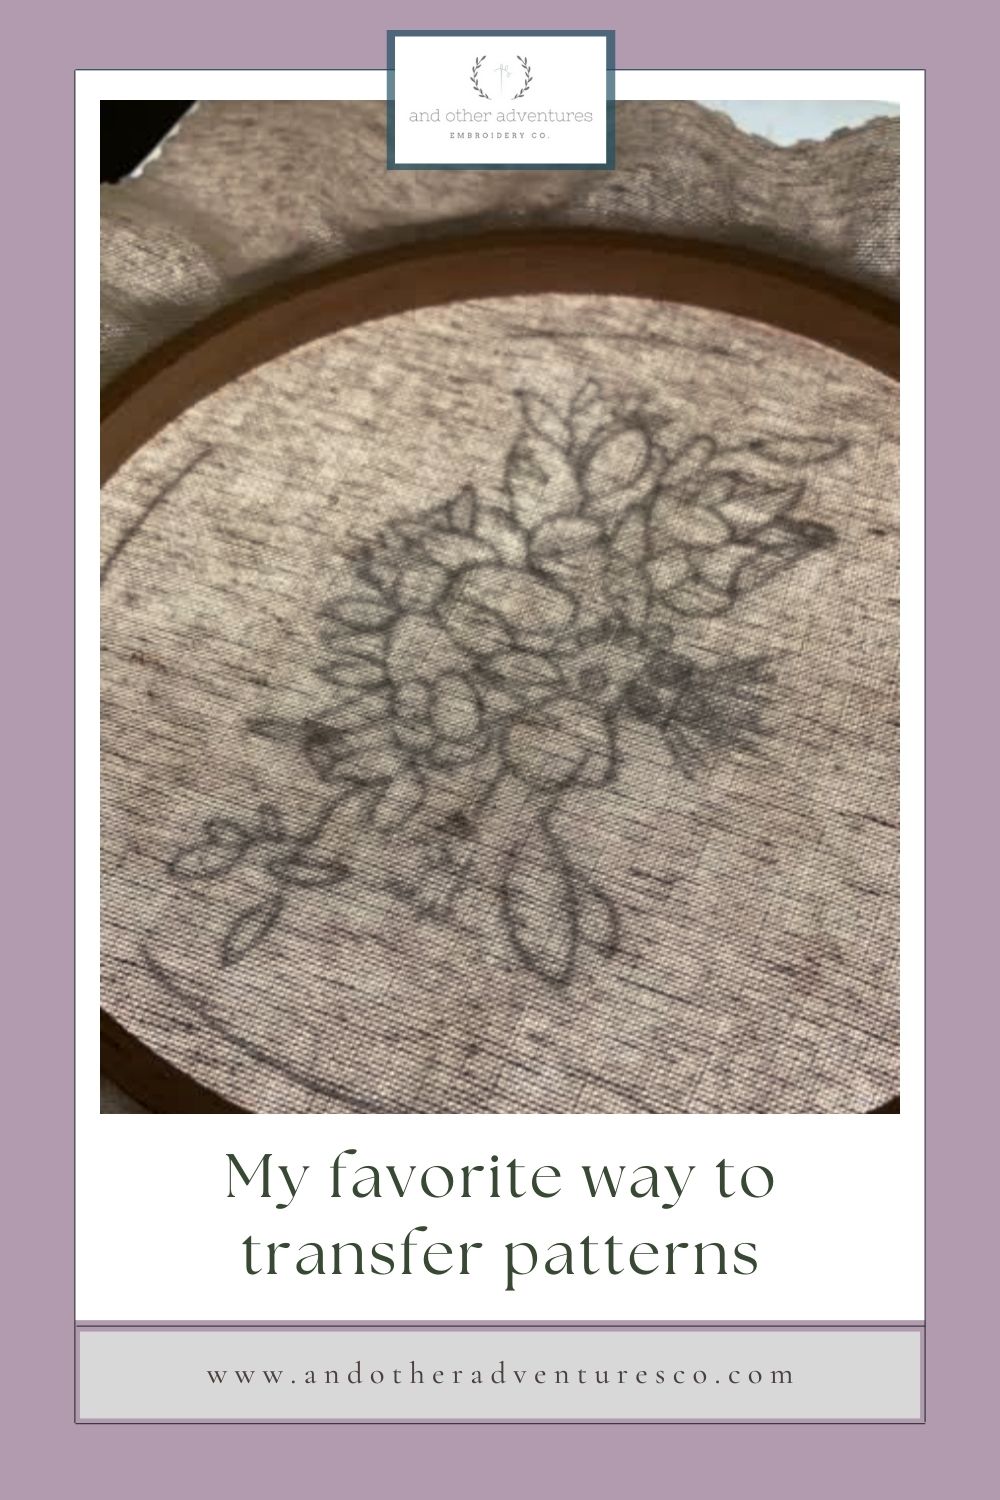 My favorite way to transfer embroidery patterns - And Other Adventures Embroidery Co